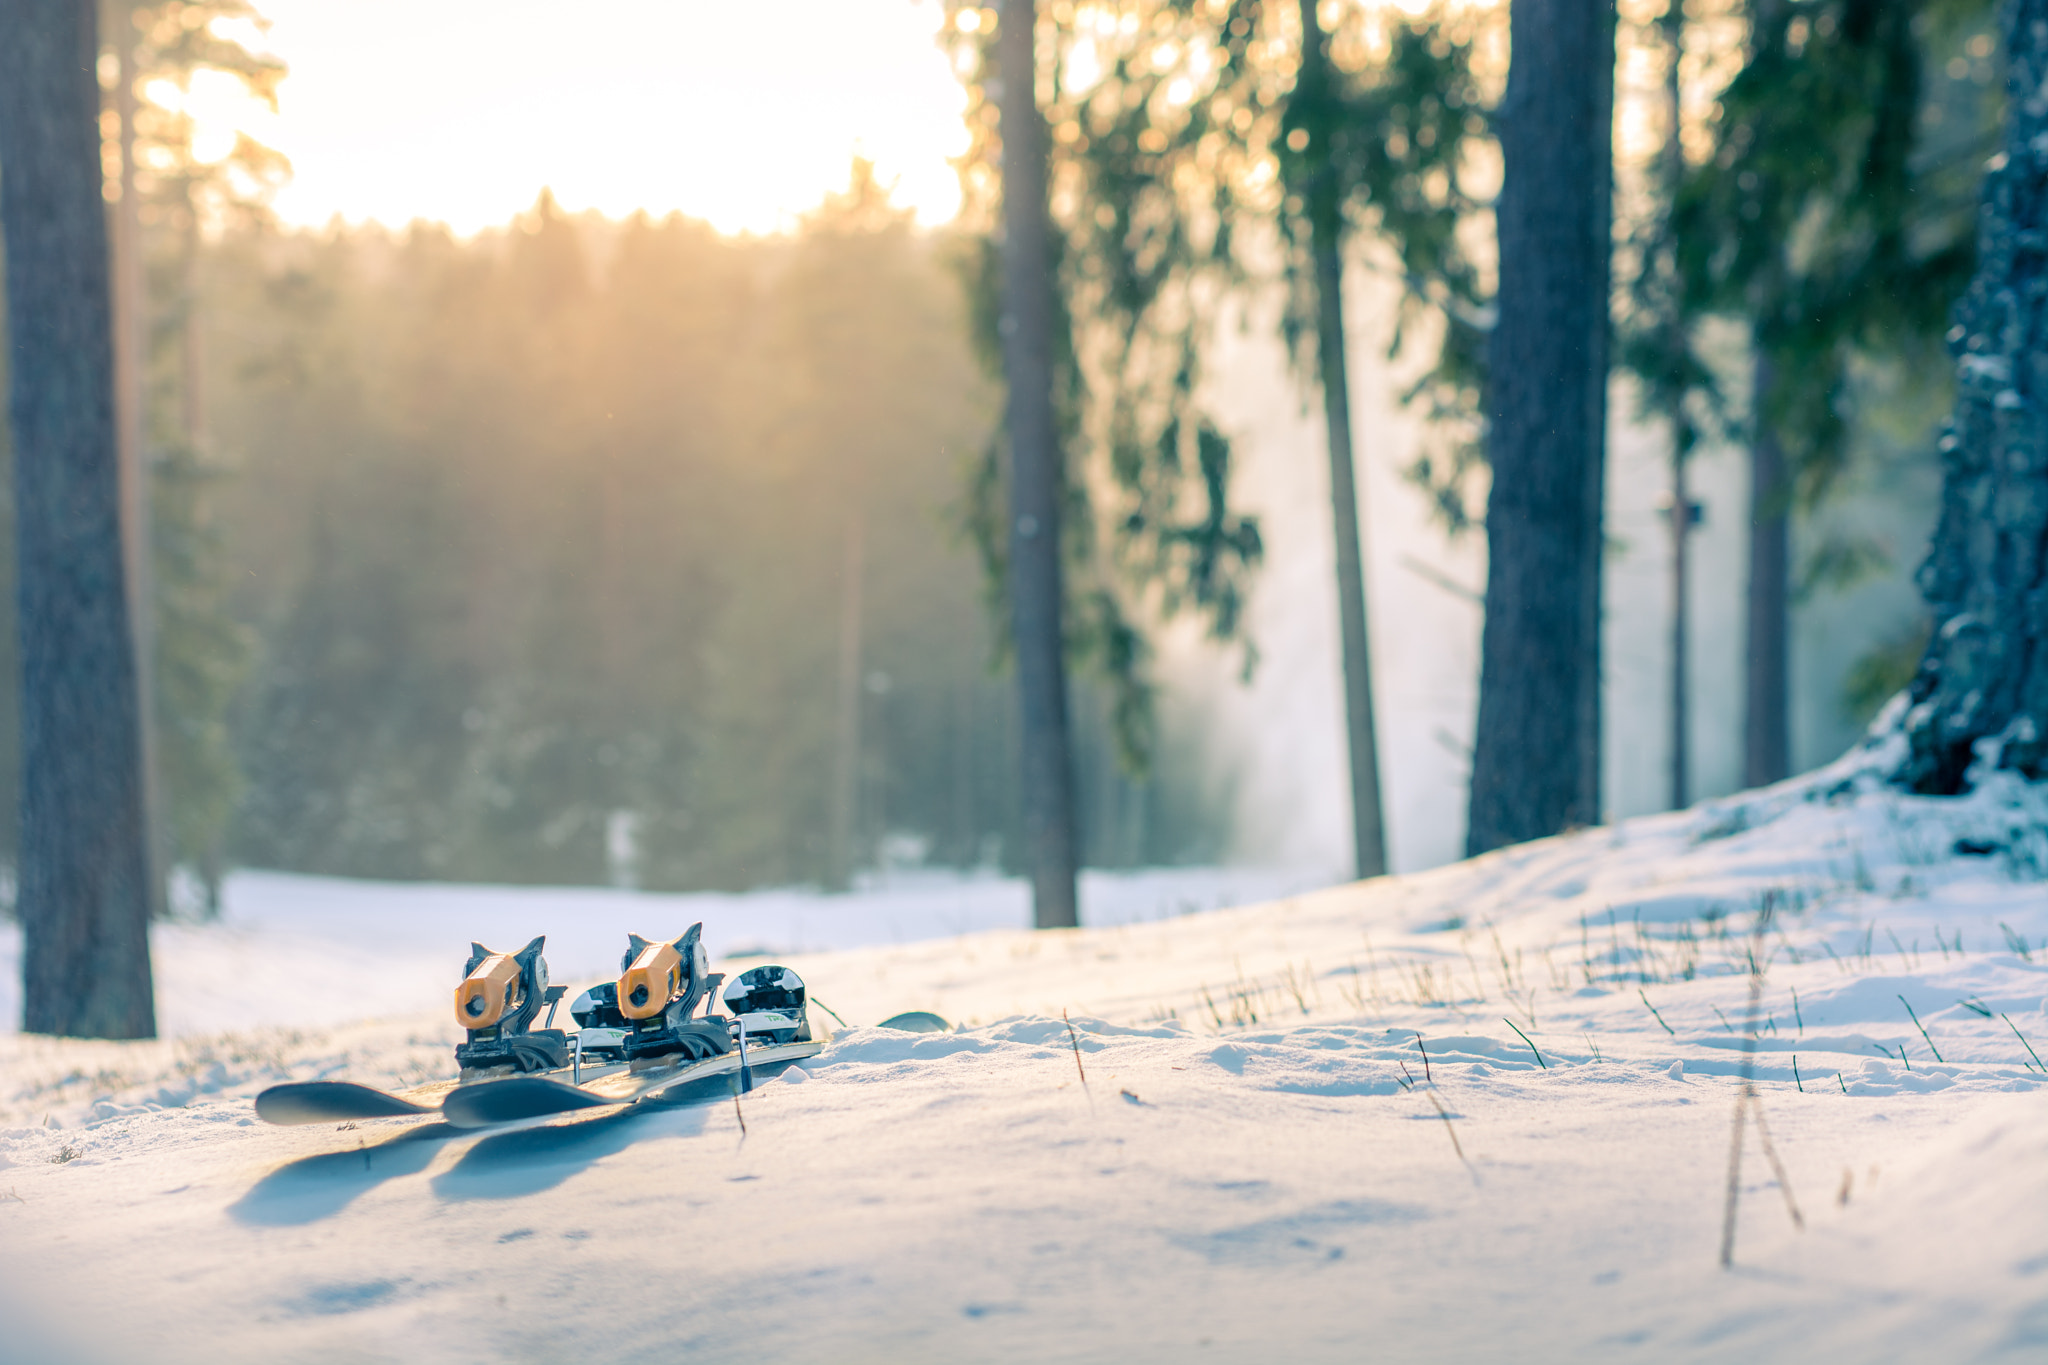 Nikon D5200 + Sigma 50mm F1.4 DG HSM Art sample photo. Mountain skis at sunset in snowy forest photography